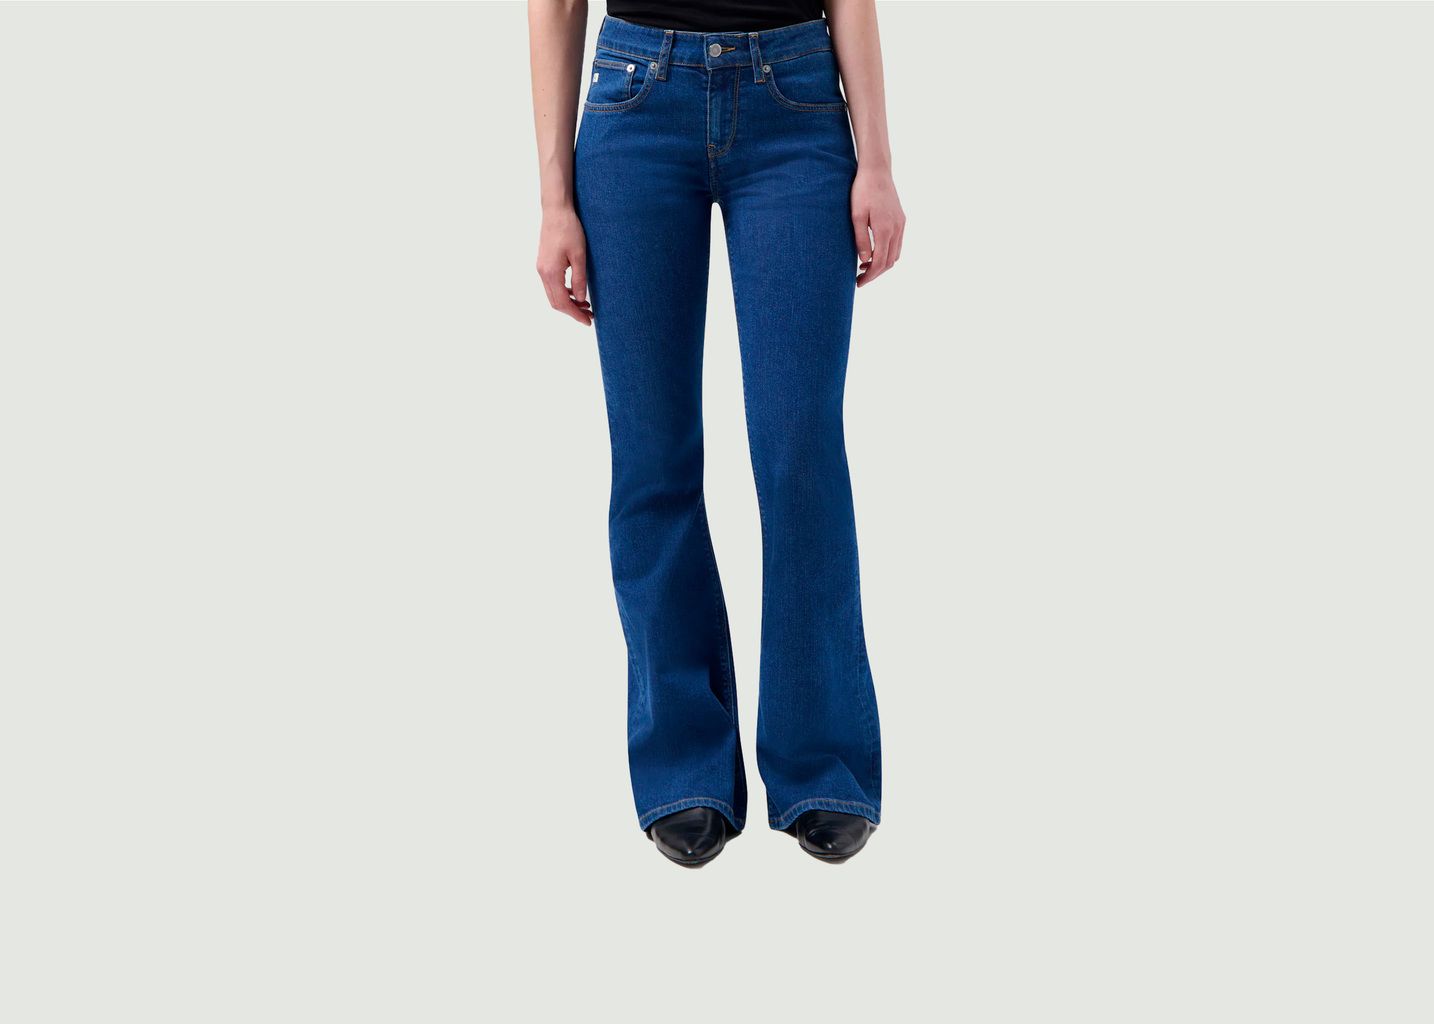 Fiona Flared Jeans - Mud Jeans